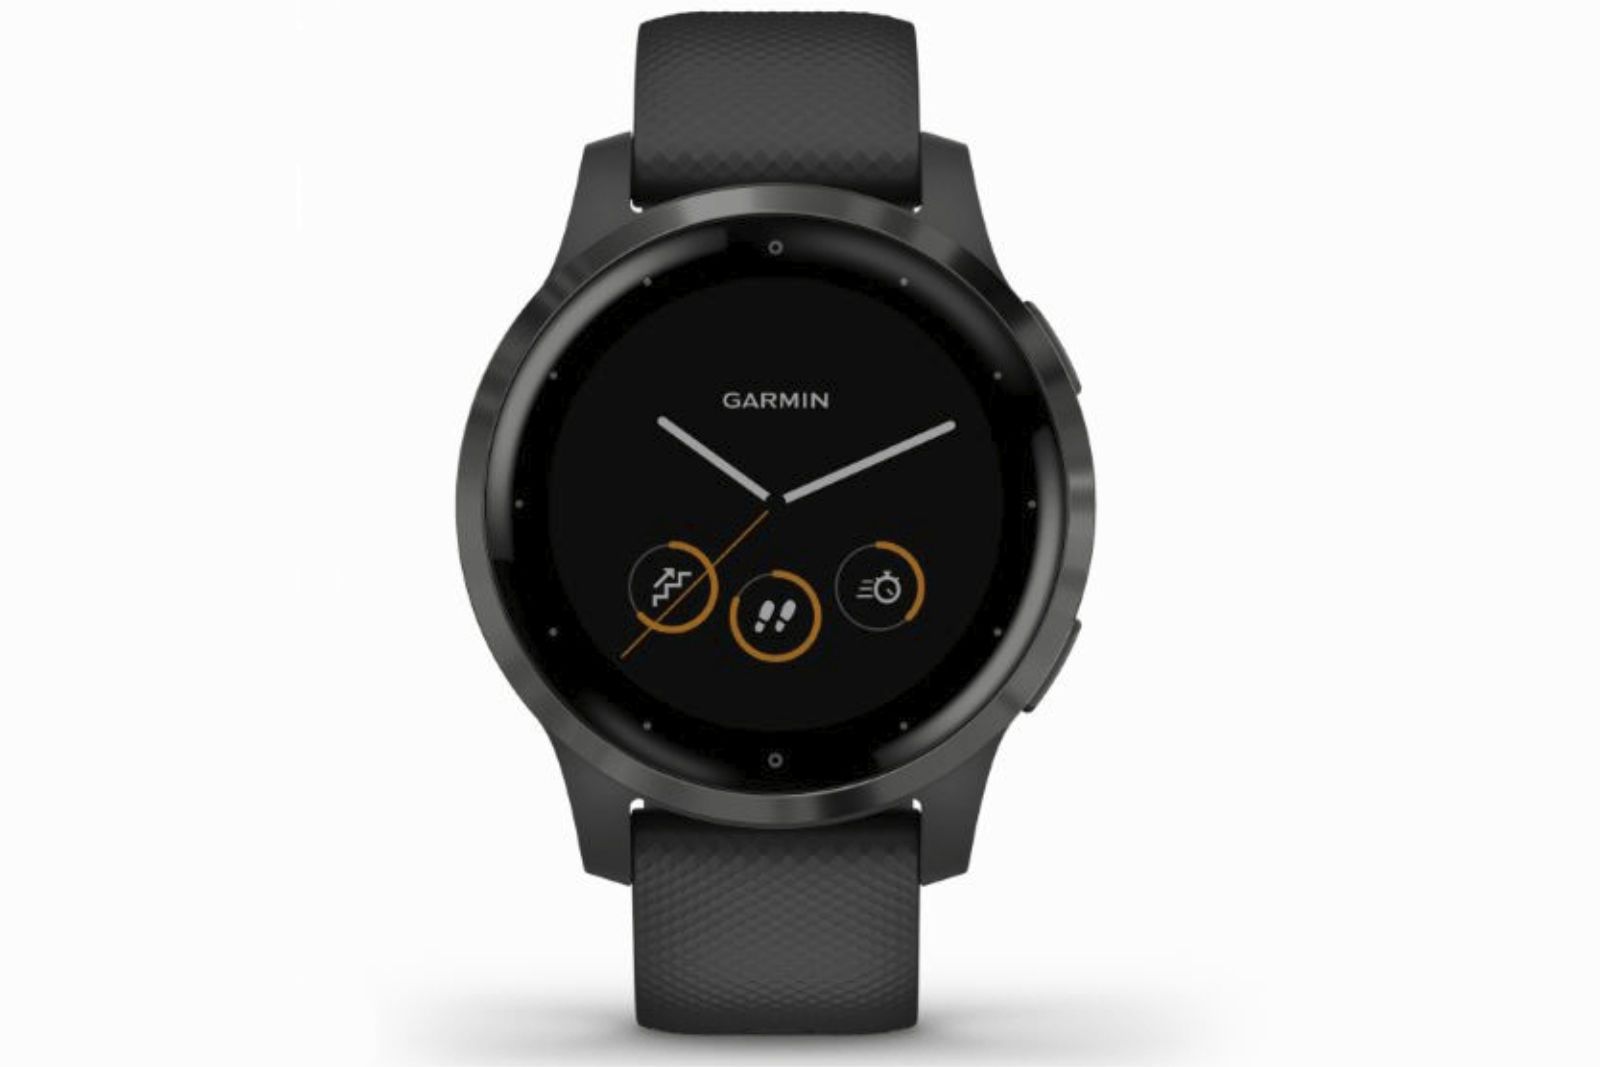 Six new Garmin watches have leaked showing an entire new lineup image 2